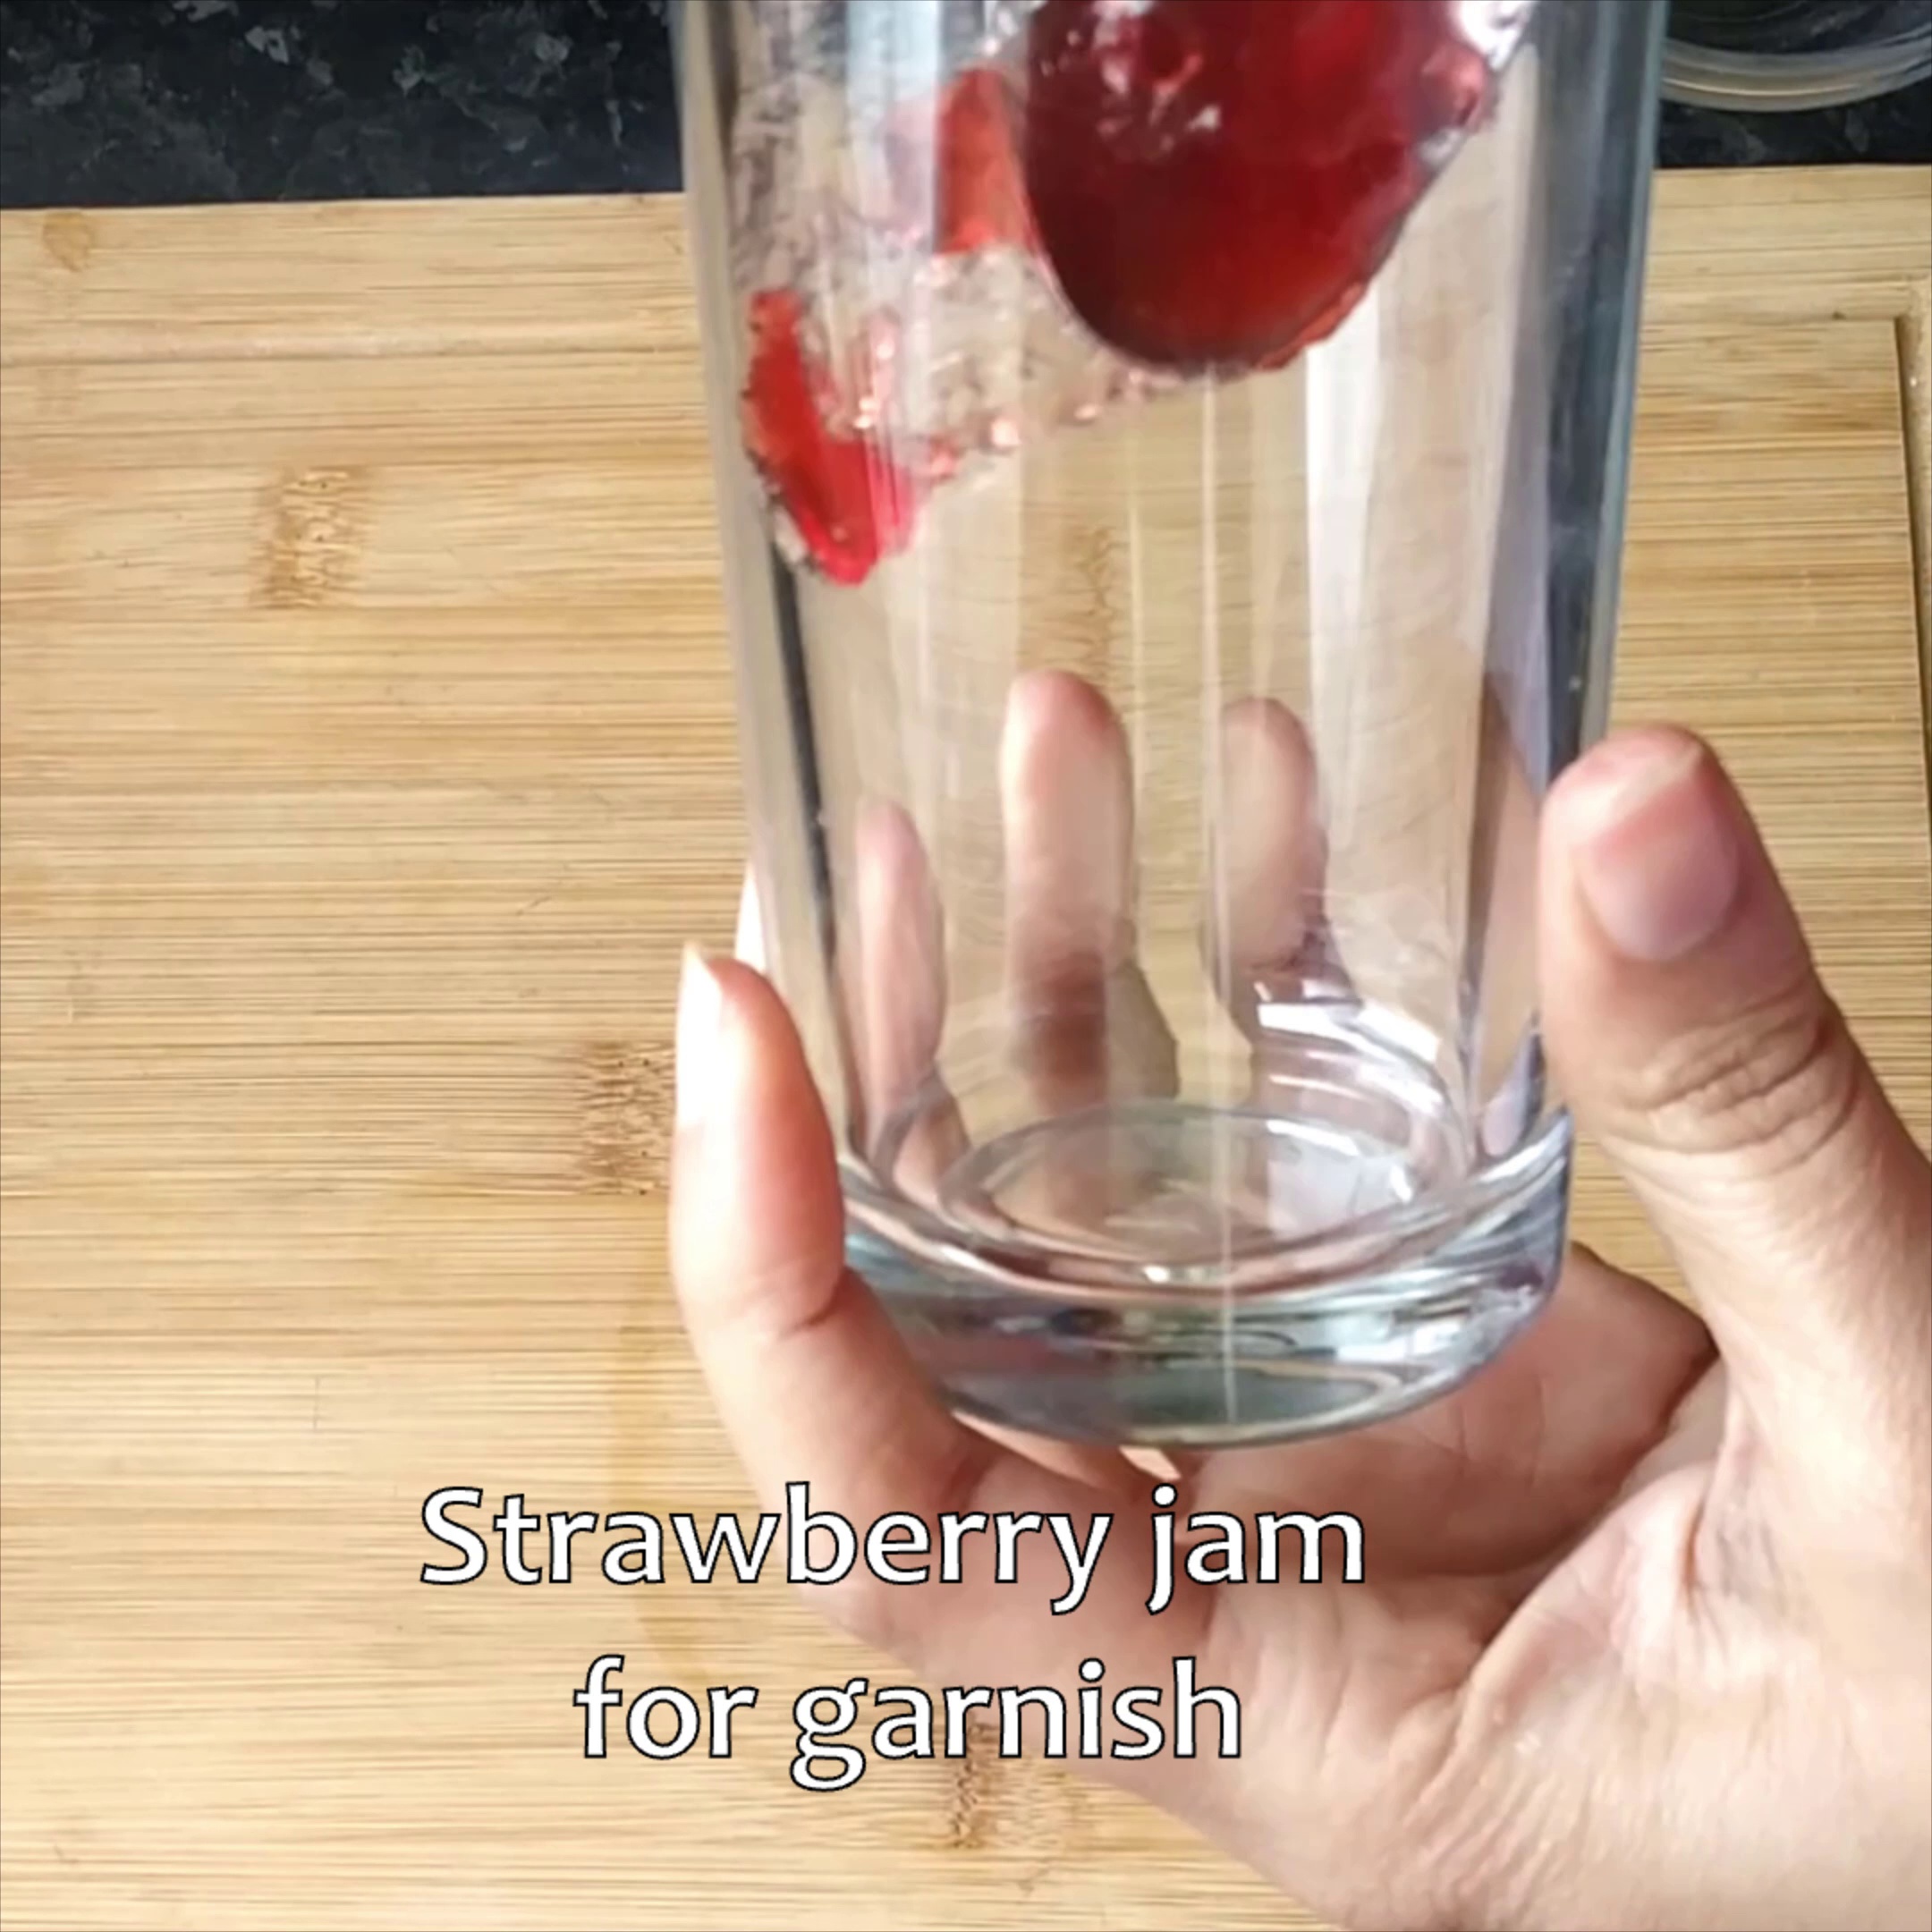 Step 4 - Add some jam on the sides of the glass to make it fancy.